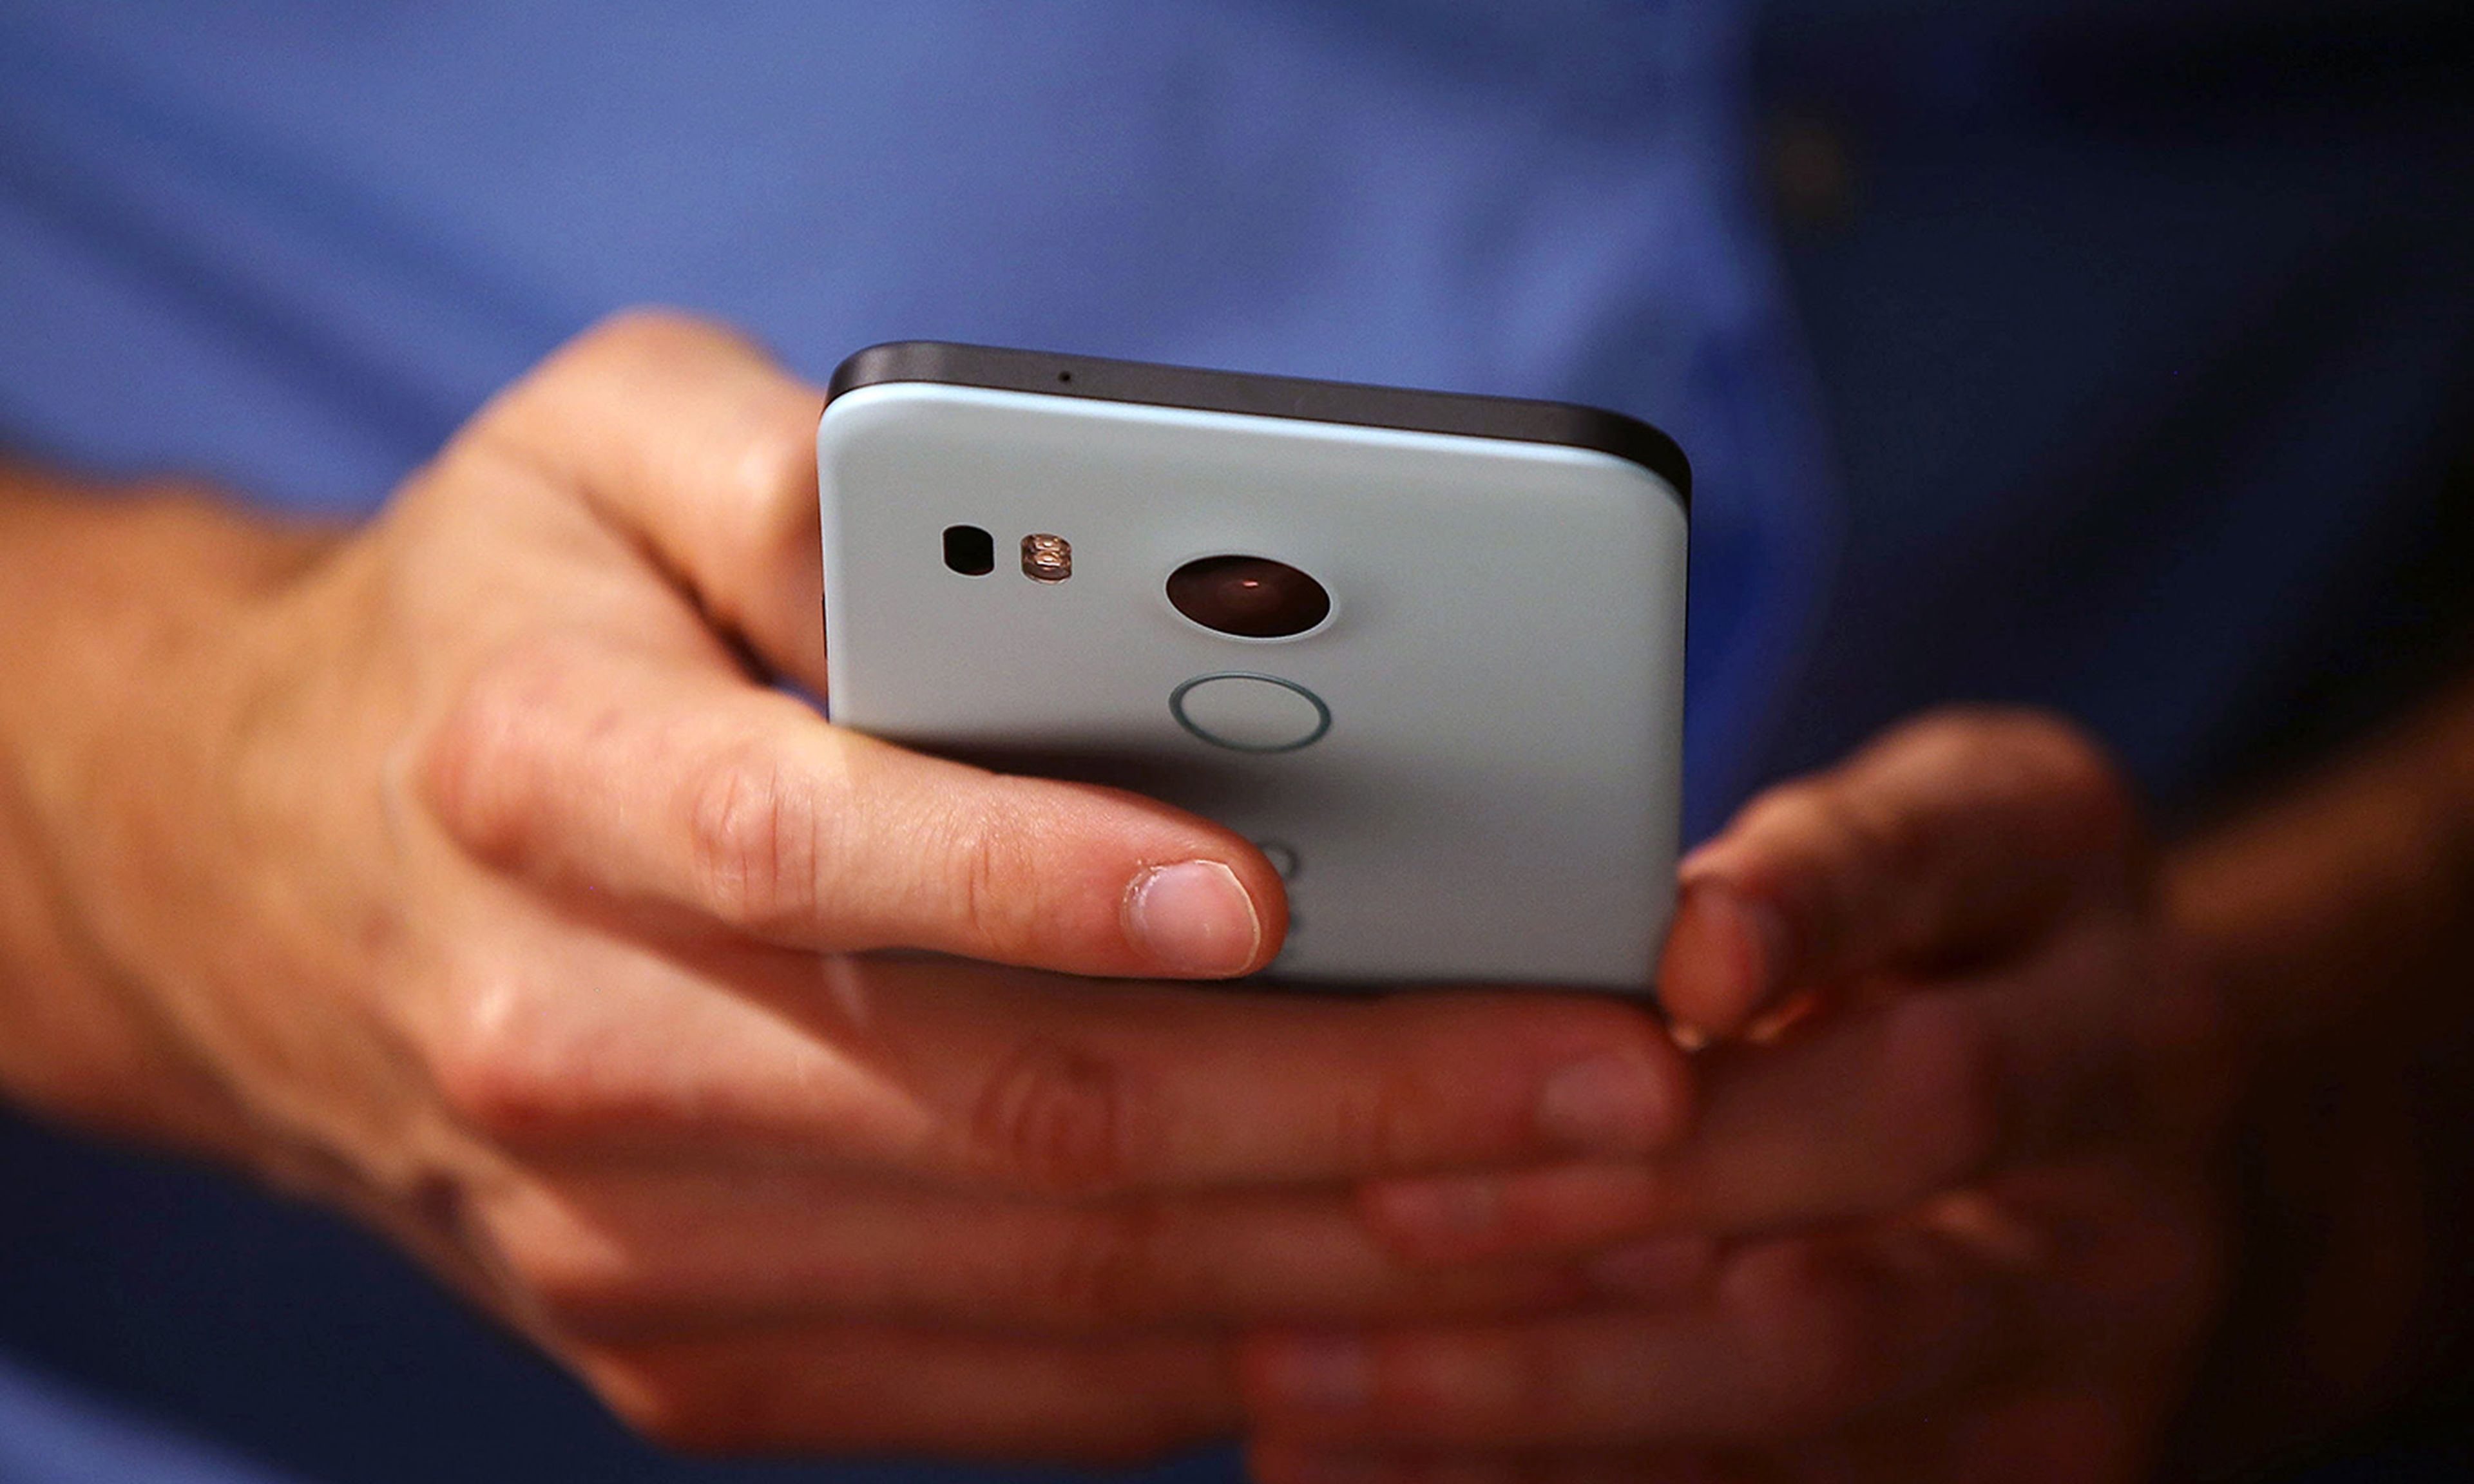 An attendee inspects the Nexus 5X phone during a Google media event on Sept. 29, 2015, in San Francisco. (Photo by Justin Sullivan/Getty Images)